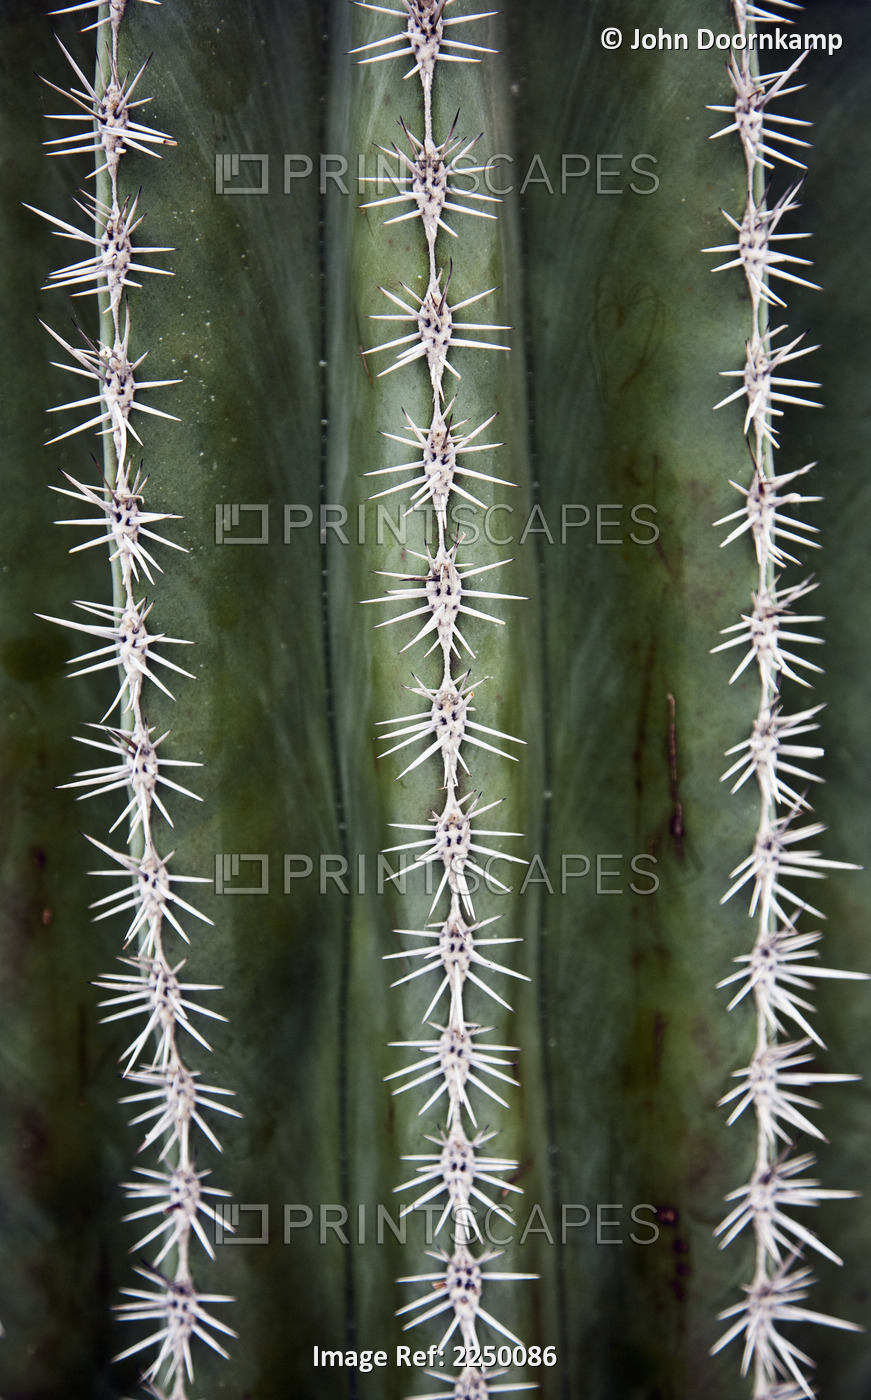 A symmetrical vertical pattern of spikes on a cactus plant.